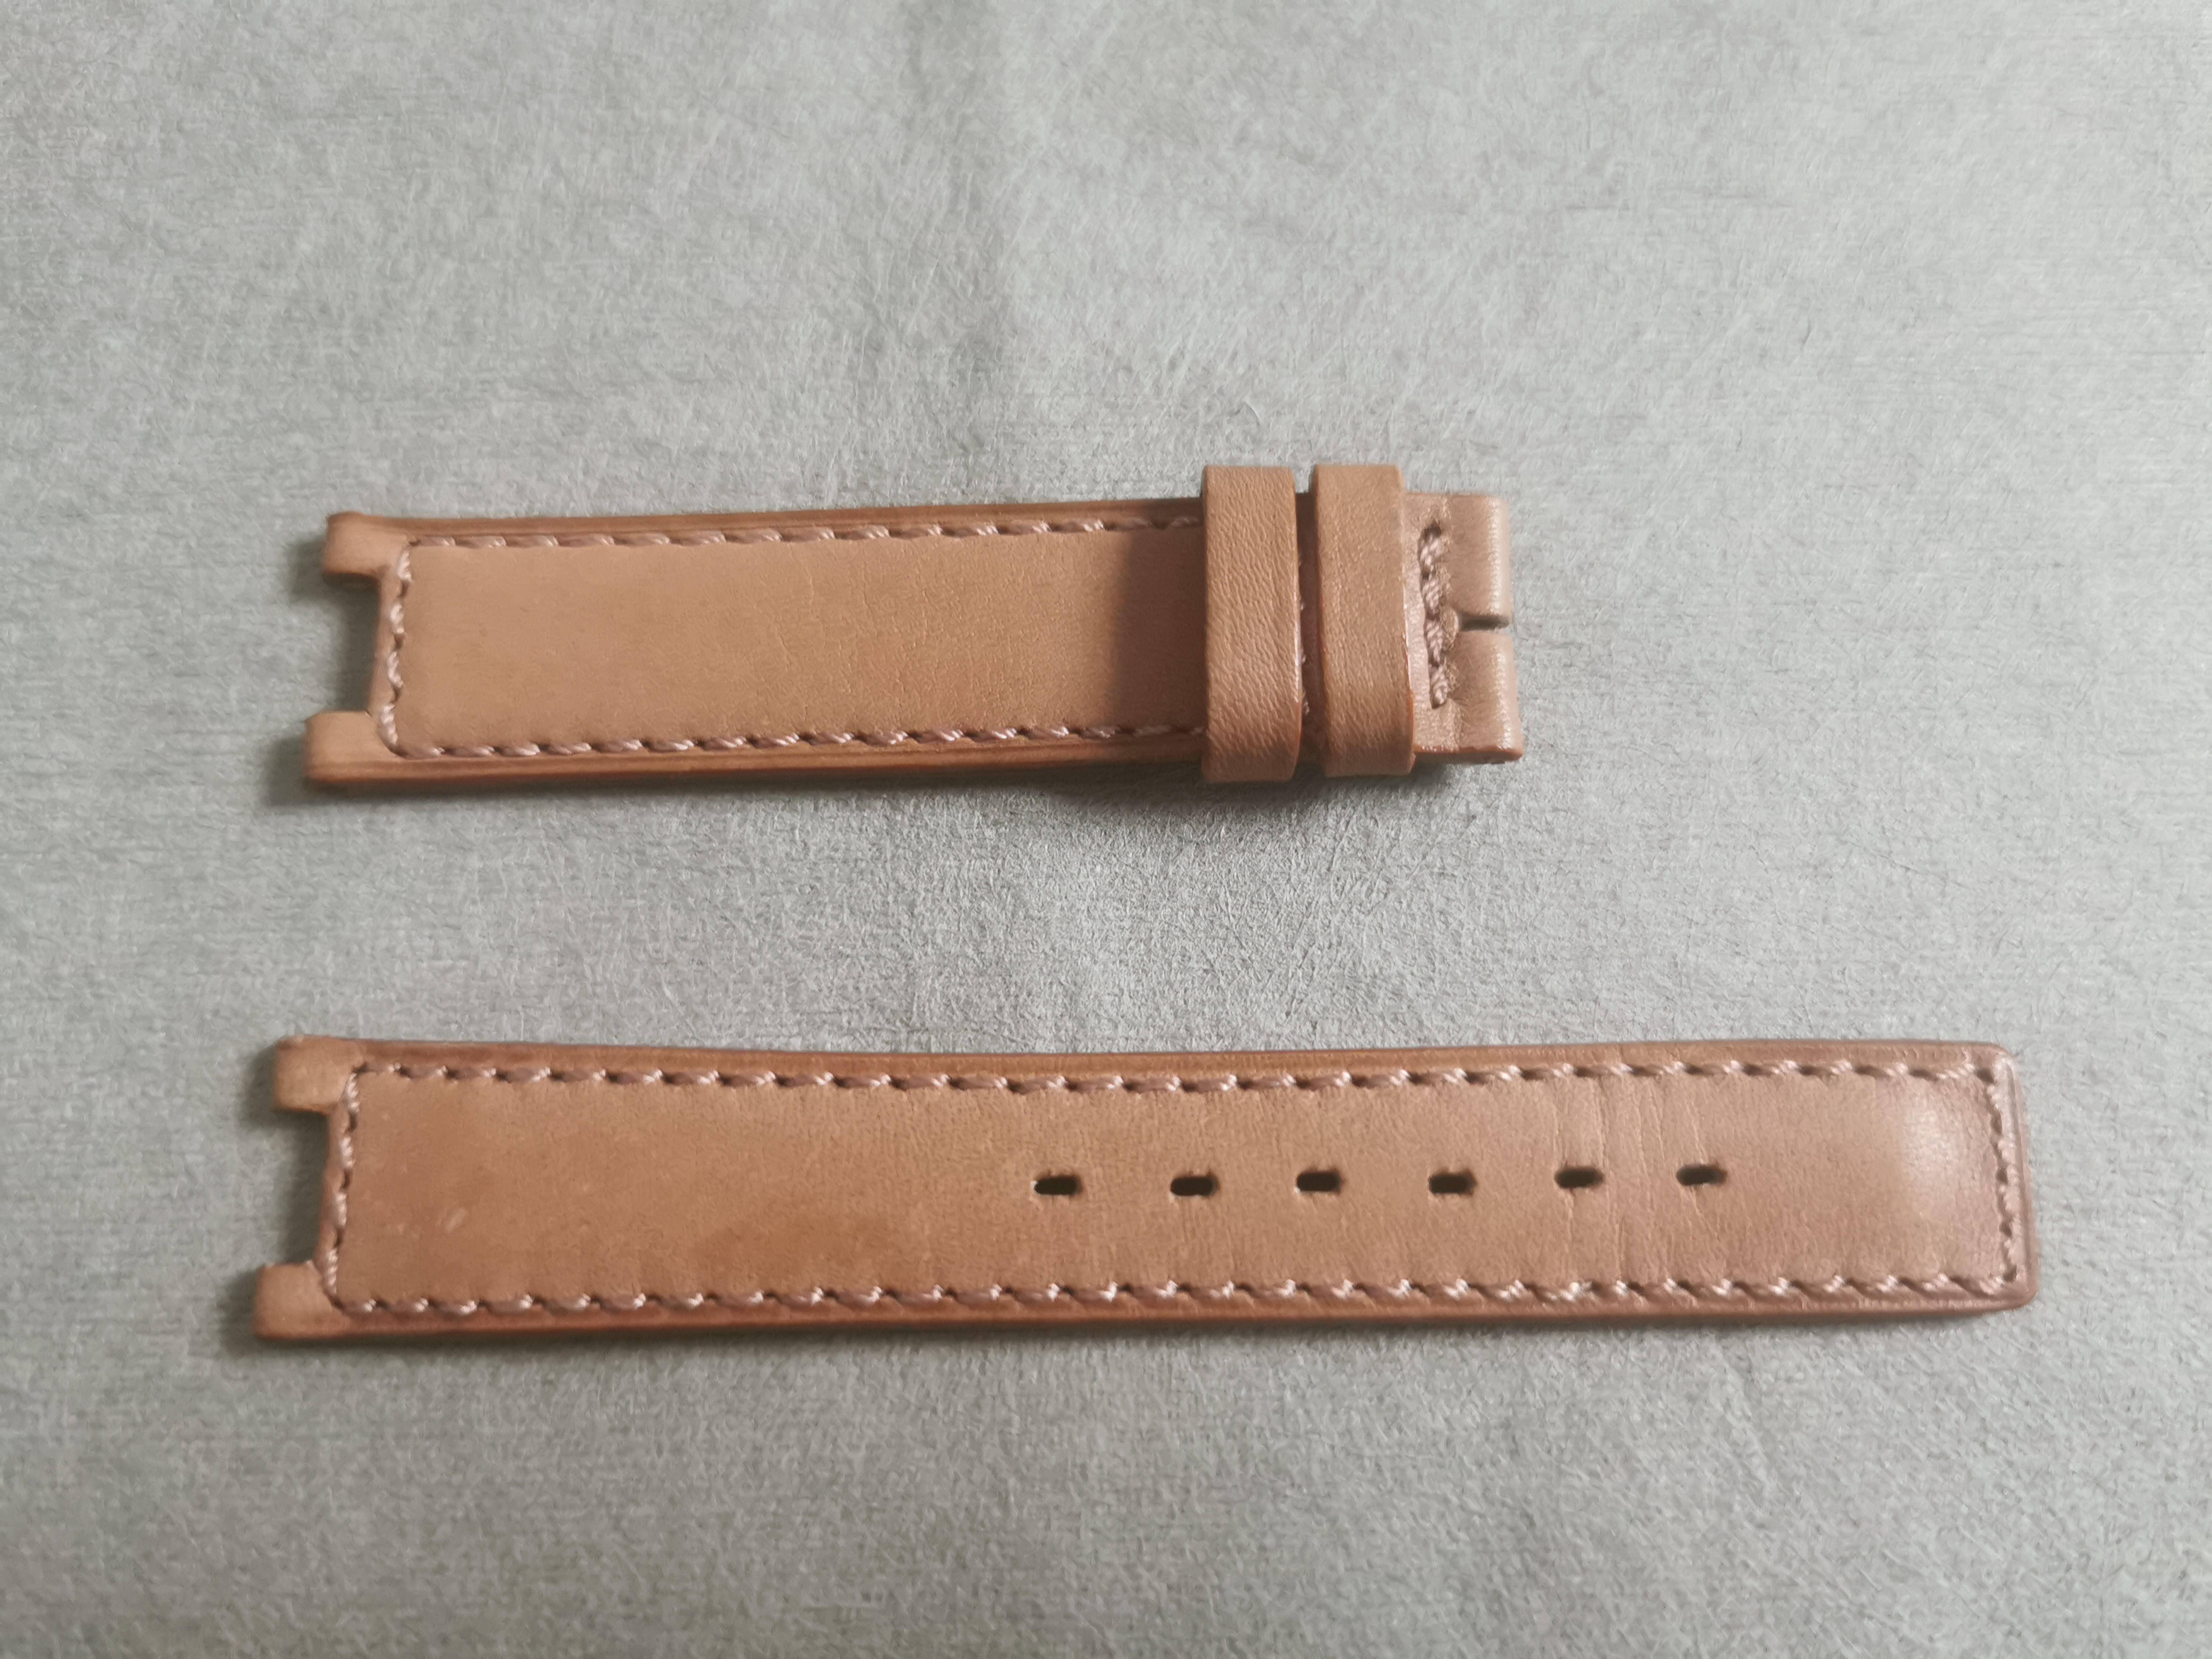 Jaeger-LeCoultre  Vintage ligth brown calf leather strap mm 16 - 15 newoldstock condition | San Giorgio a Cremano